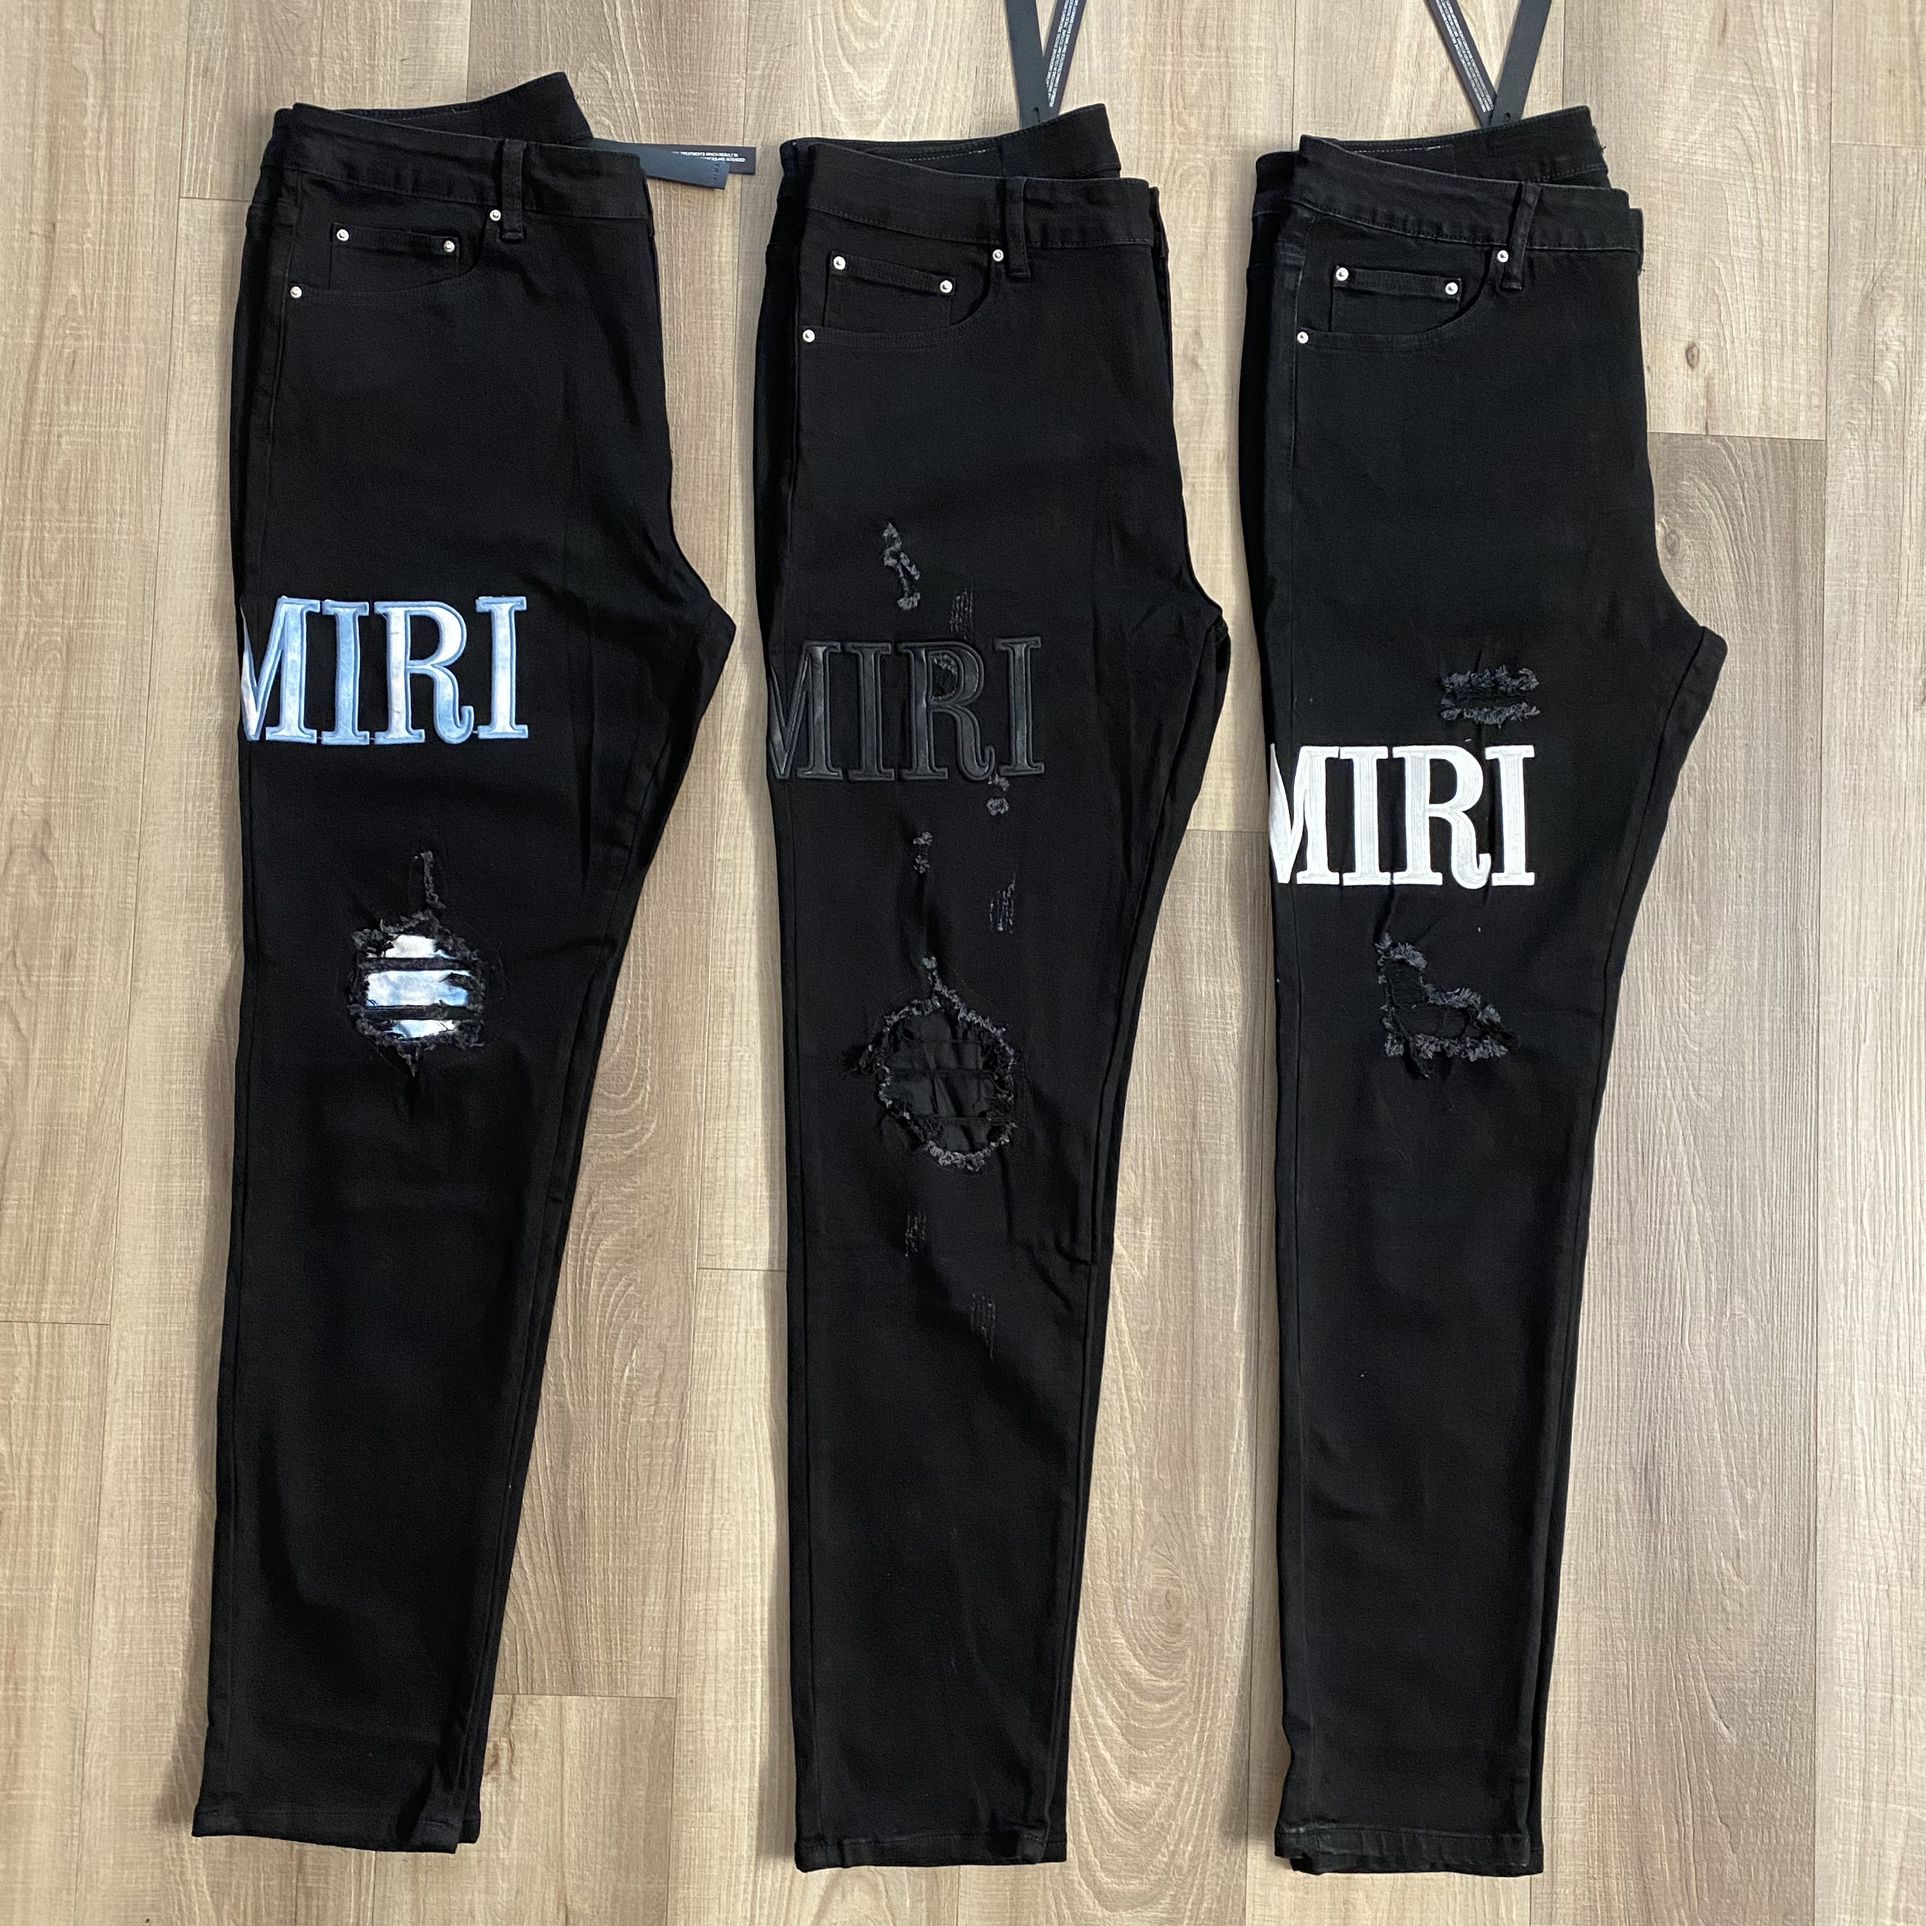 AMIRI Jeans🔥 Size 36 Pick up/Fast Delivery🚚 BEST US SELLER!